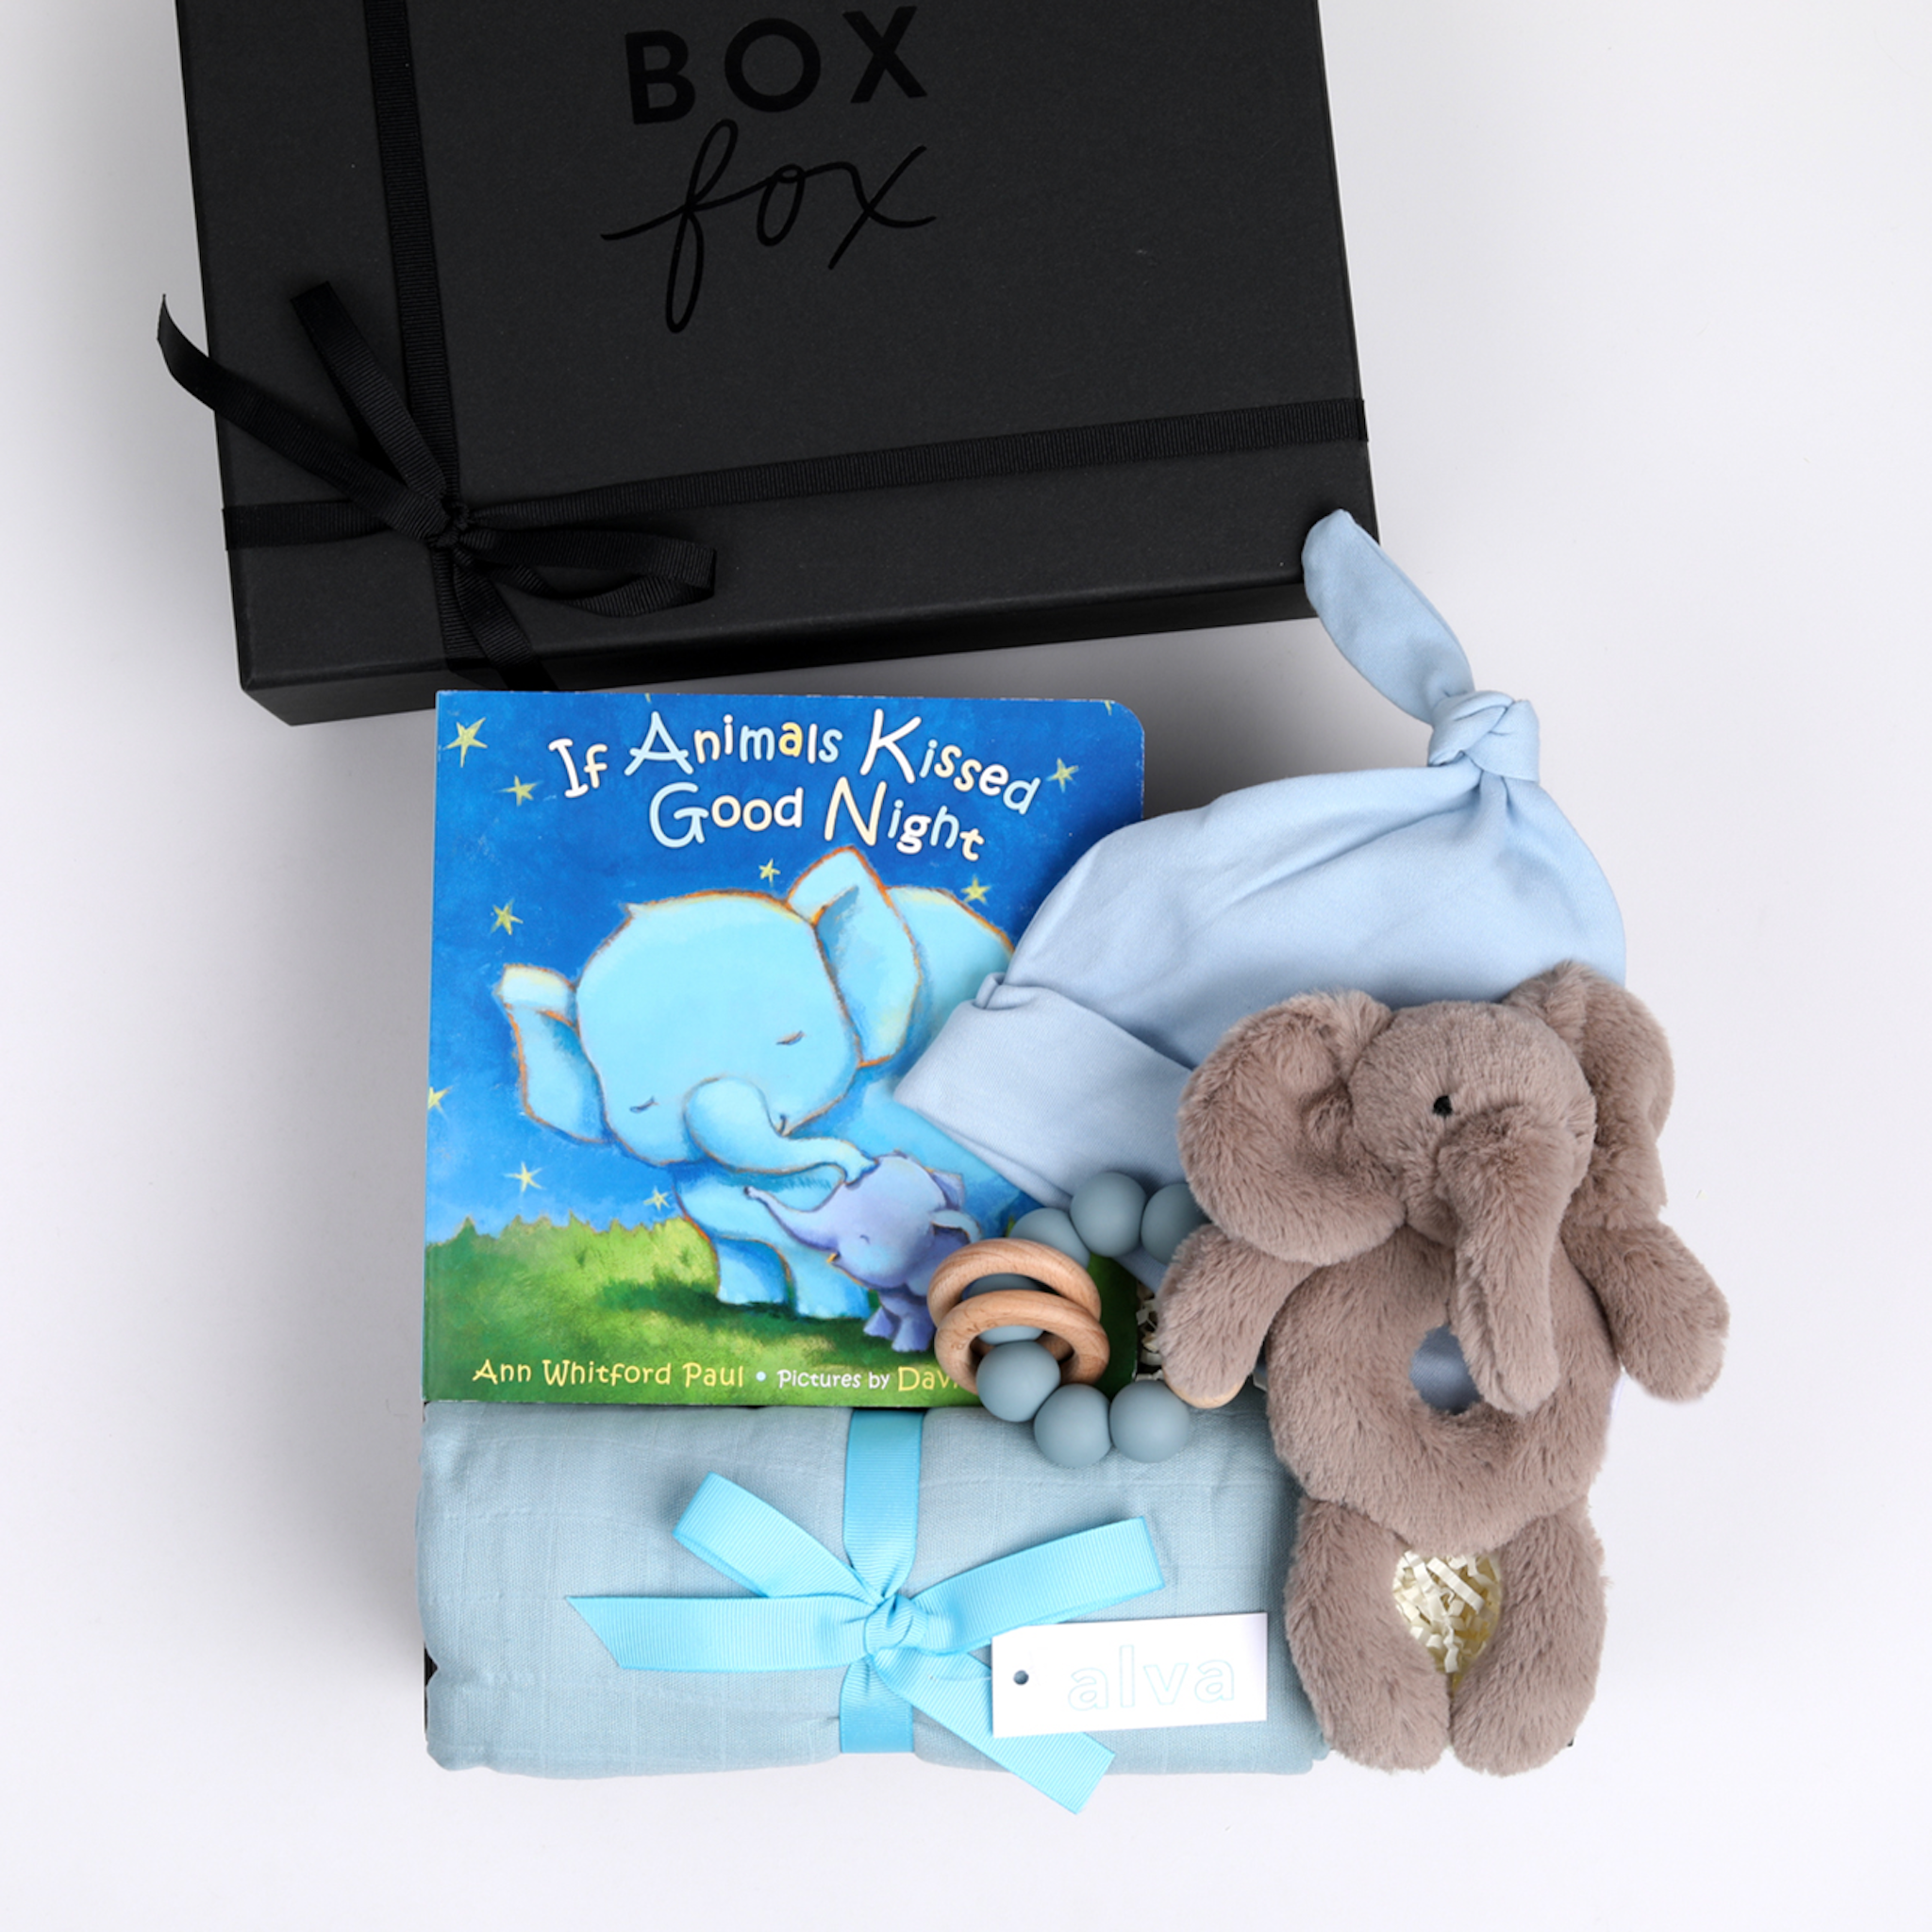 BOXFOX New Baby Boy Box in black, including a swaddle, elephant rattle teether, hat and book.